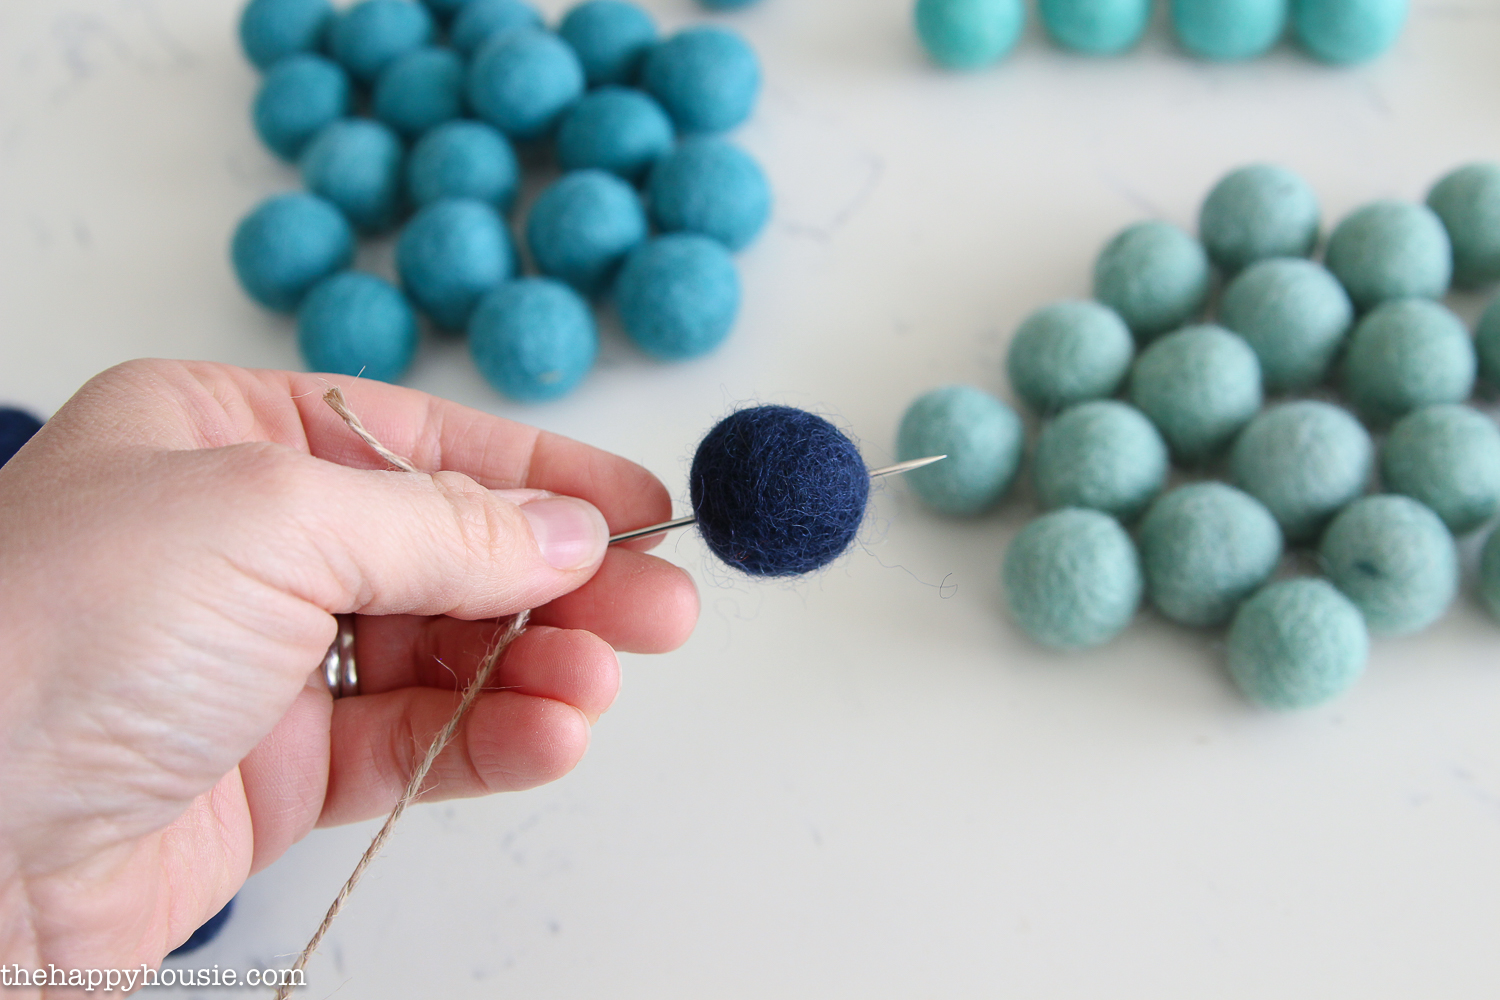 One of the felt balls being threaded onto the string with a needle.